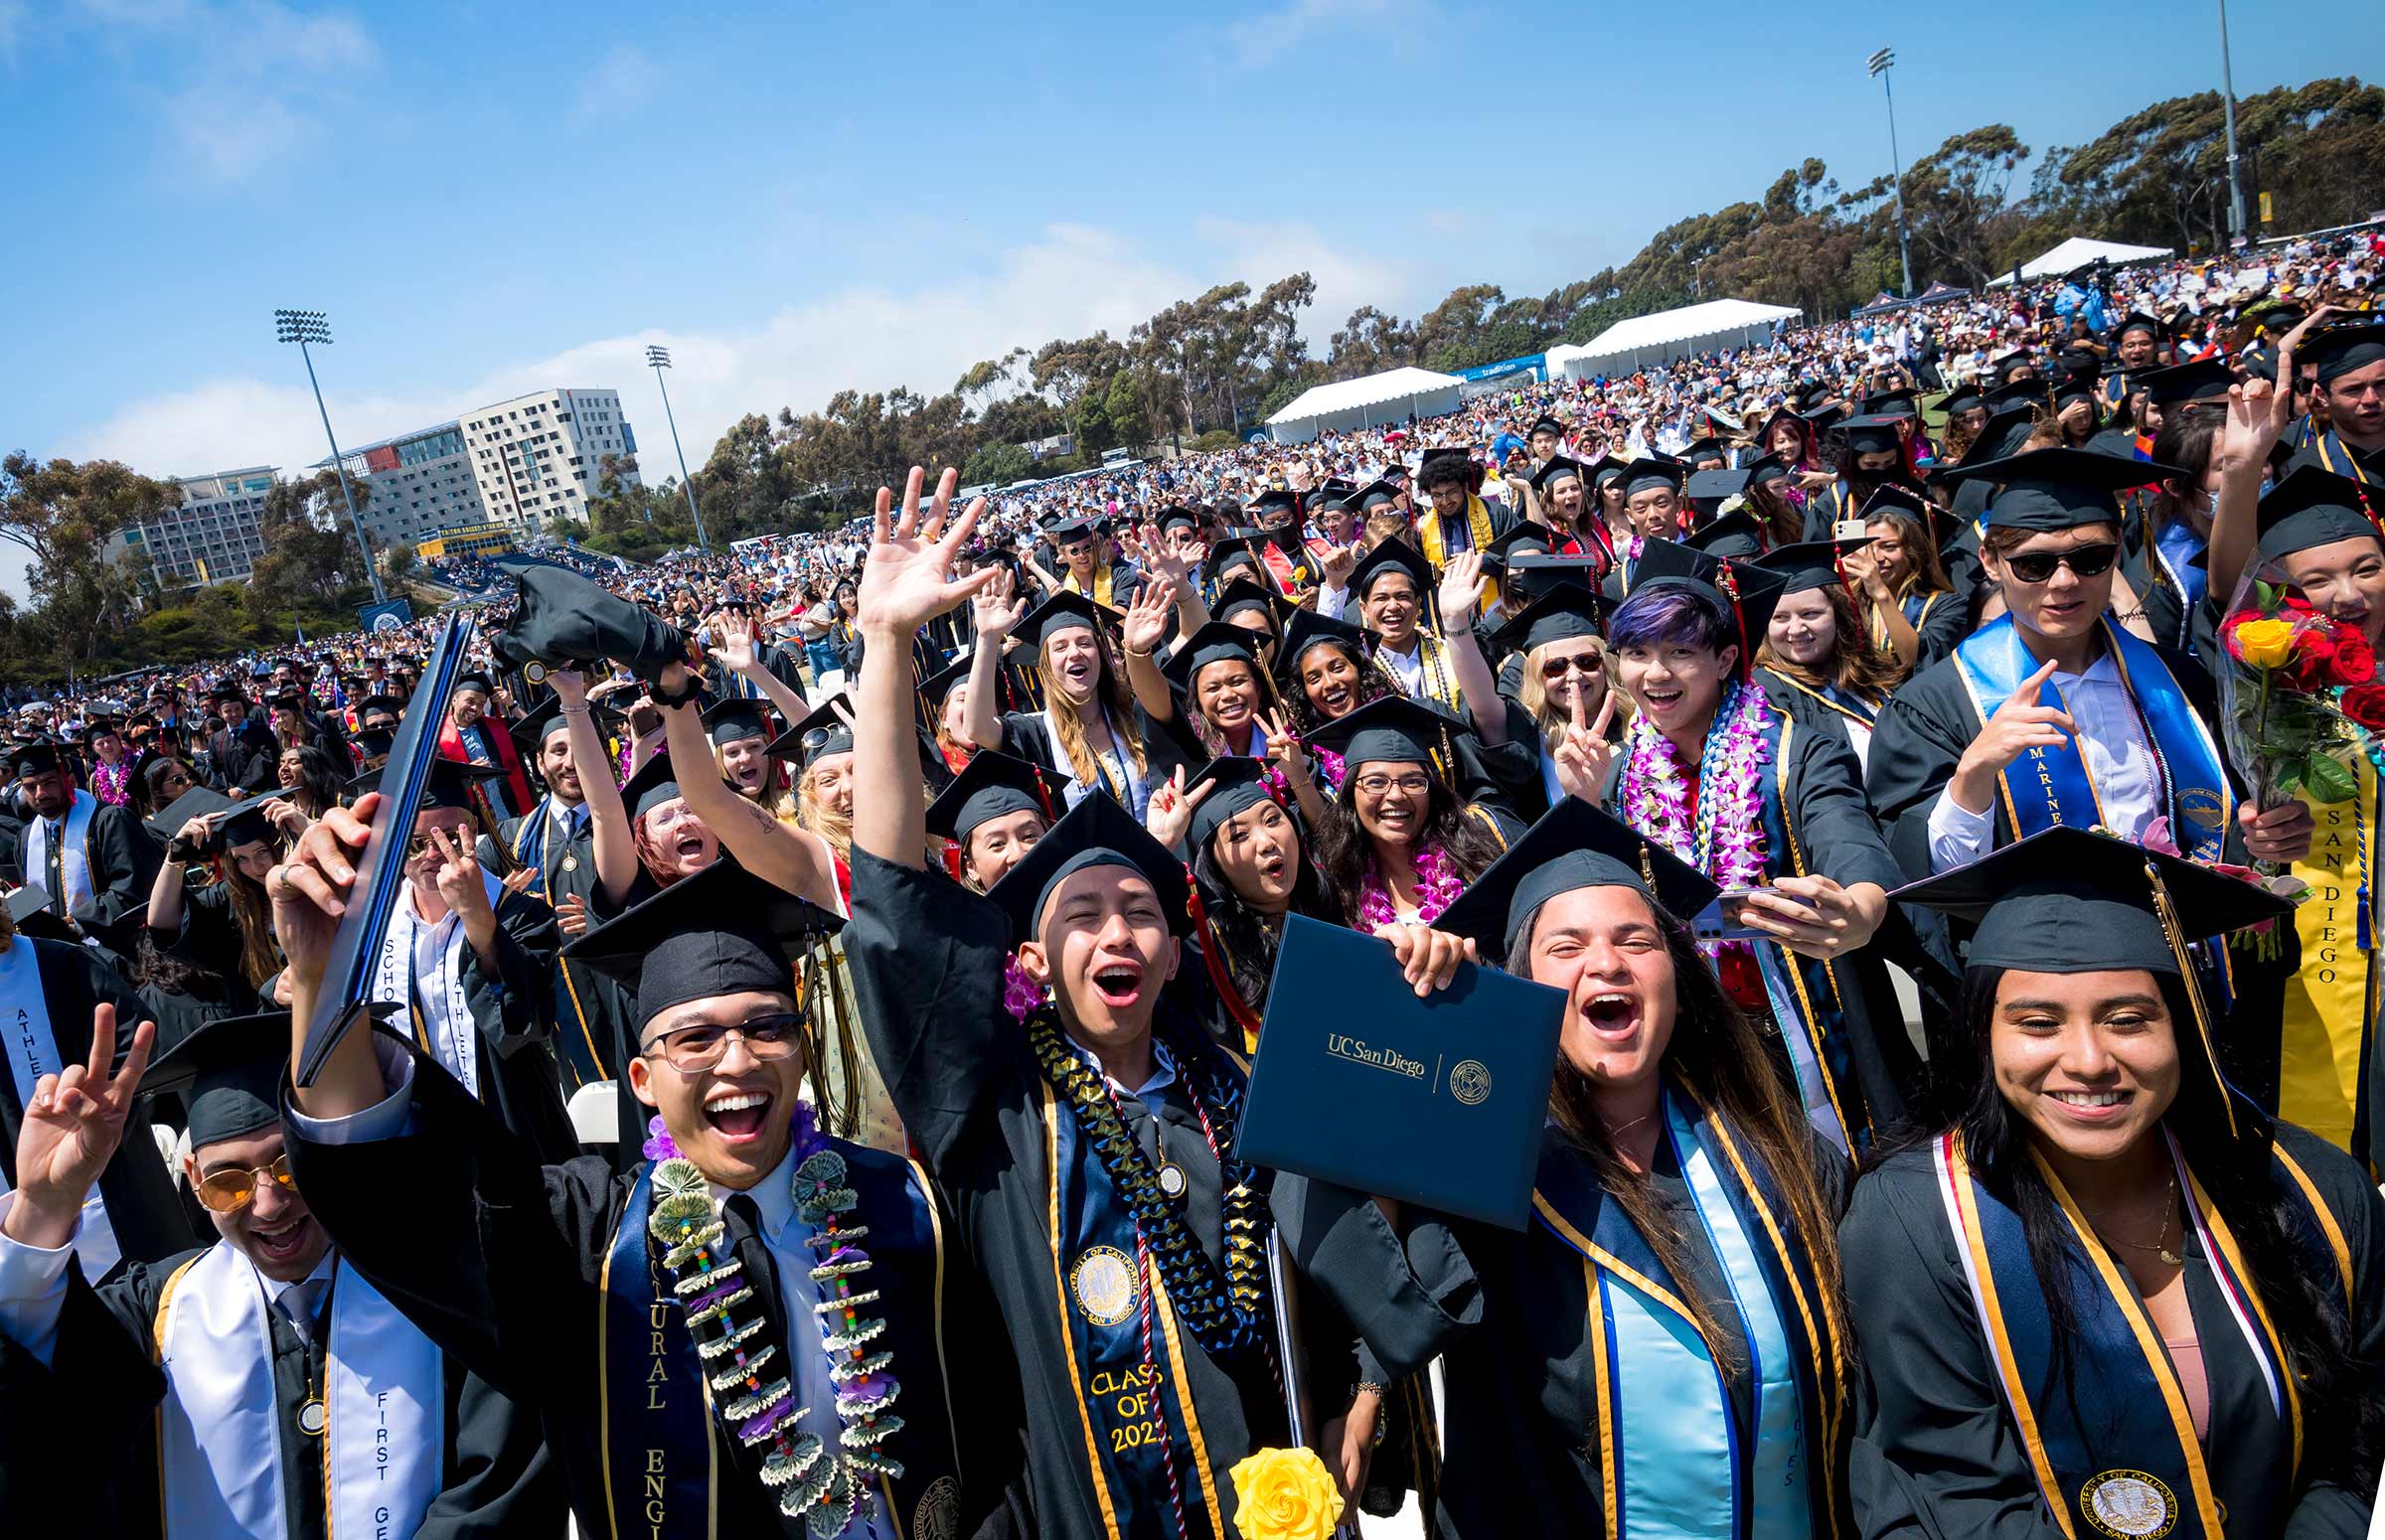 UC San Diego 2022 Commencement crowd.